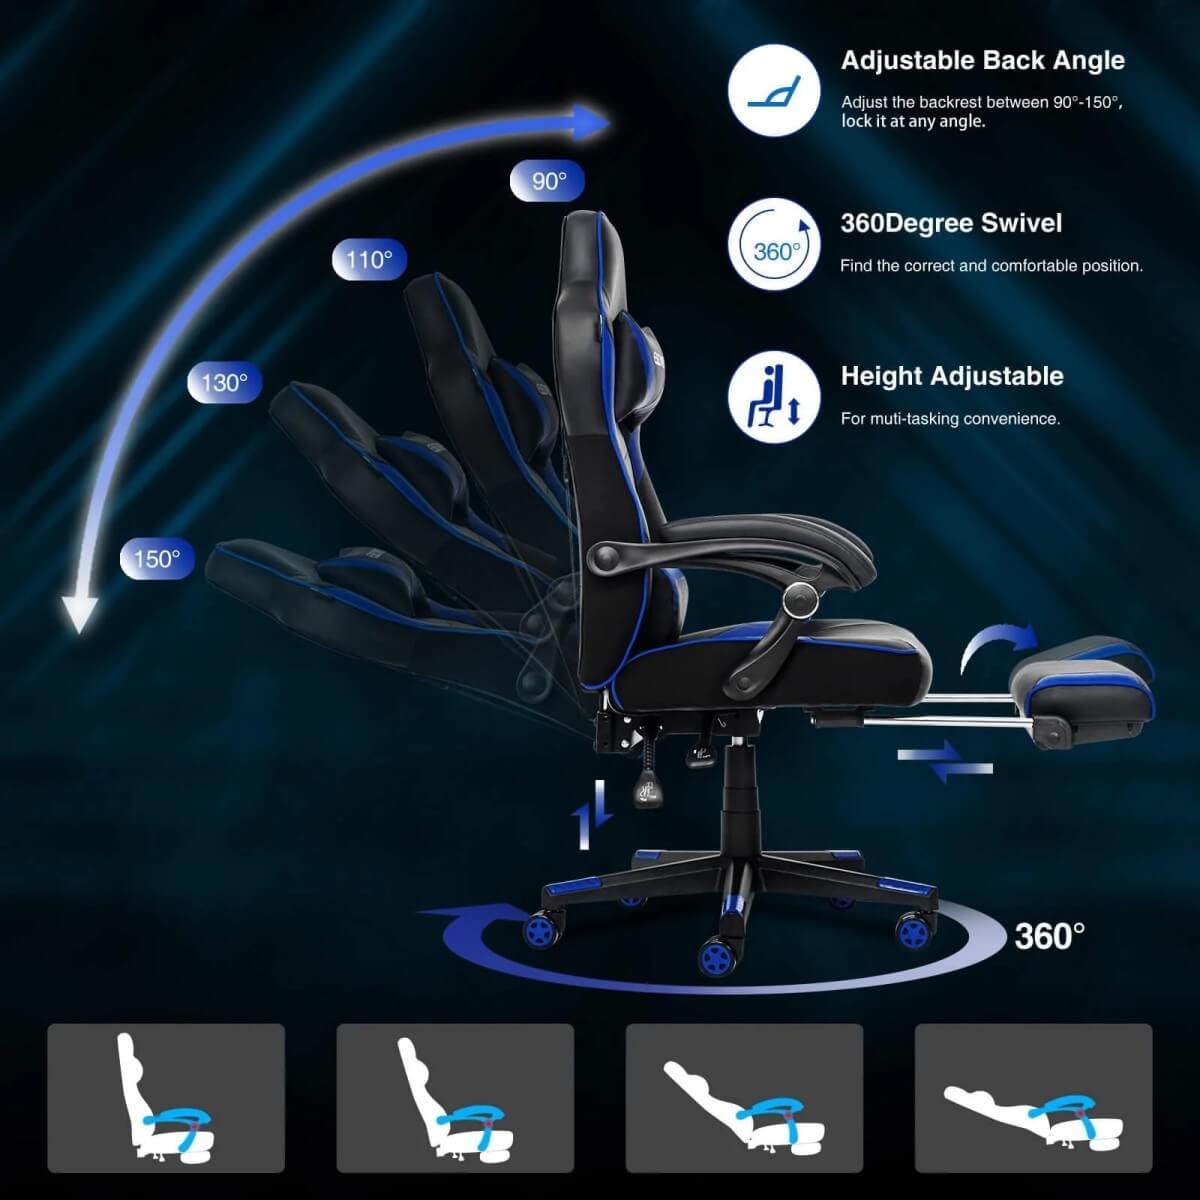 Elecwish Video Game Chairs Blue Gaming Chair With Footrest OC087 can adjustback angle, height and have 360 degree swivel